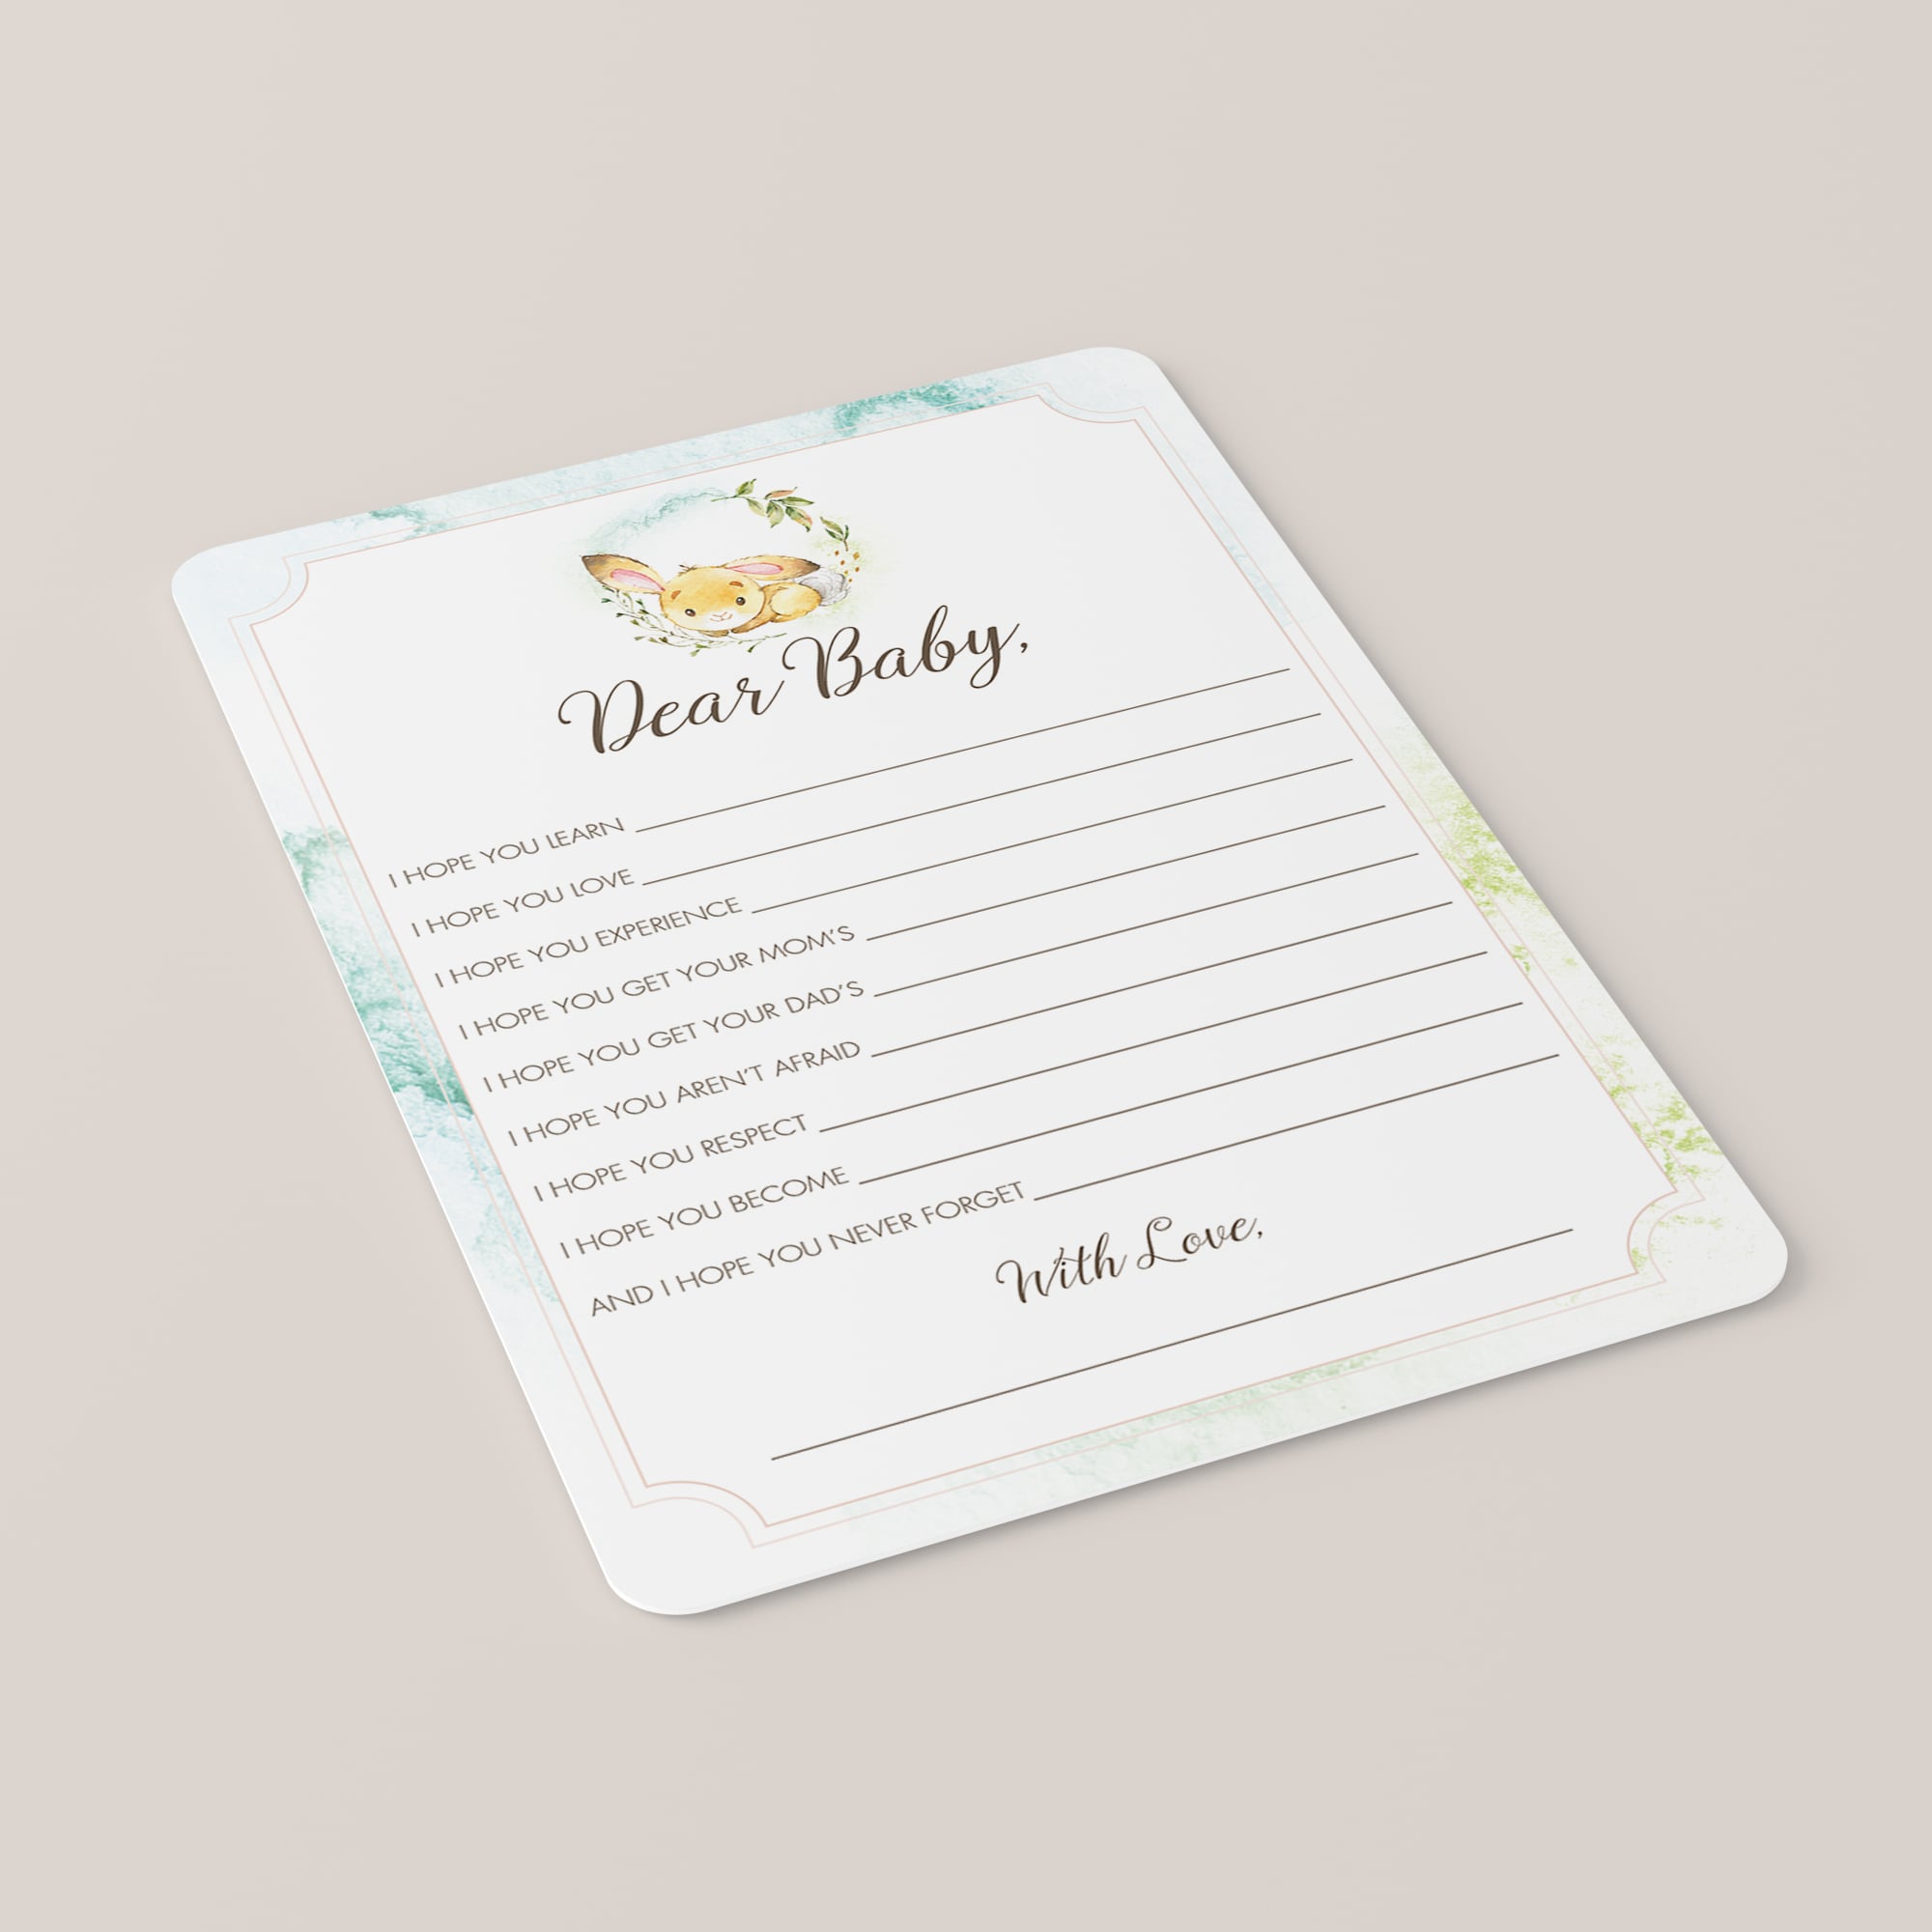 Wishes for the new baby watercolor bunny printable by LittleSizzle